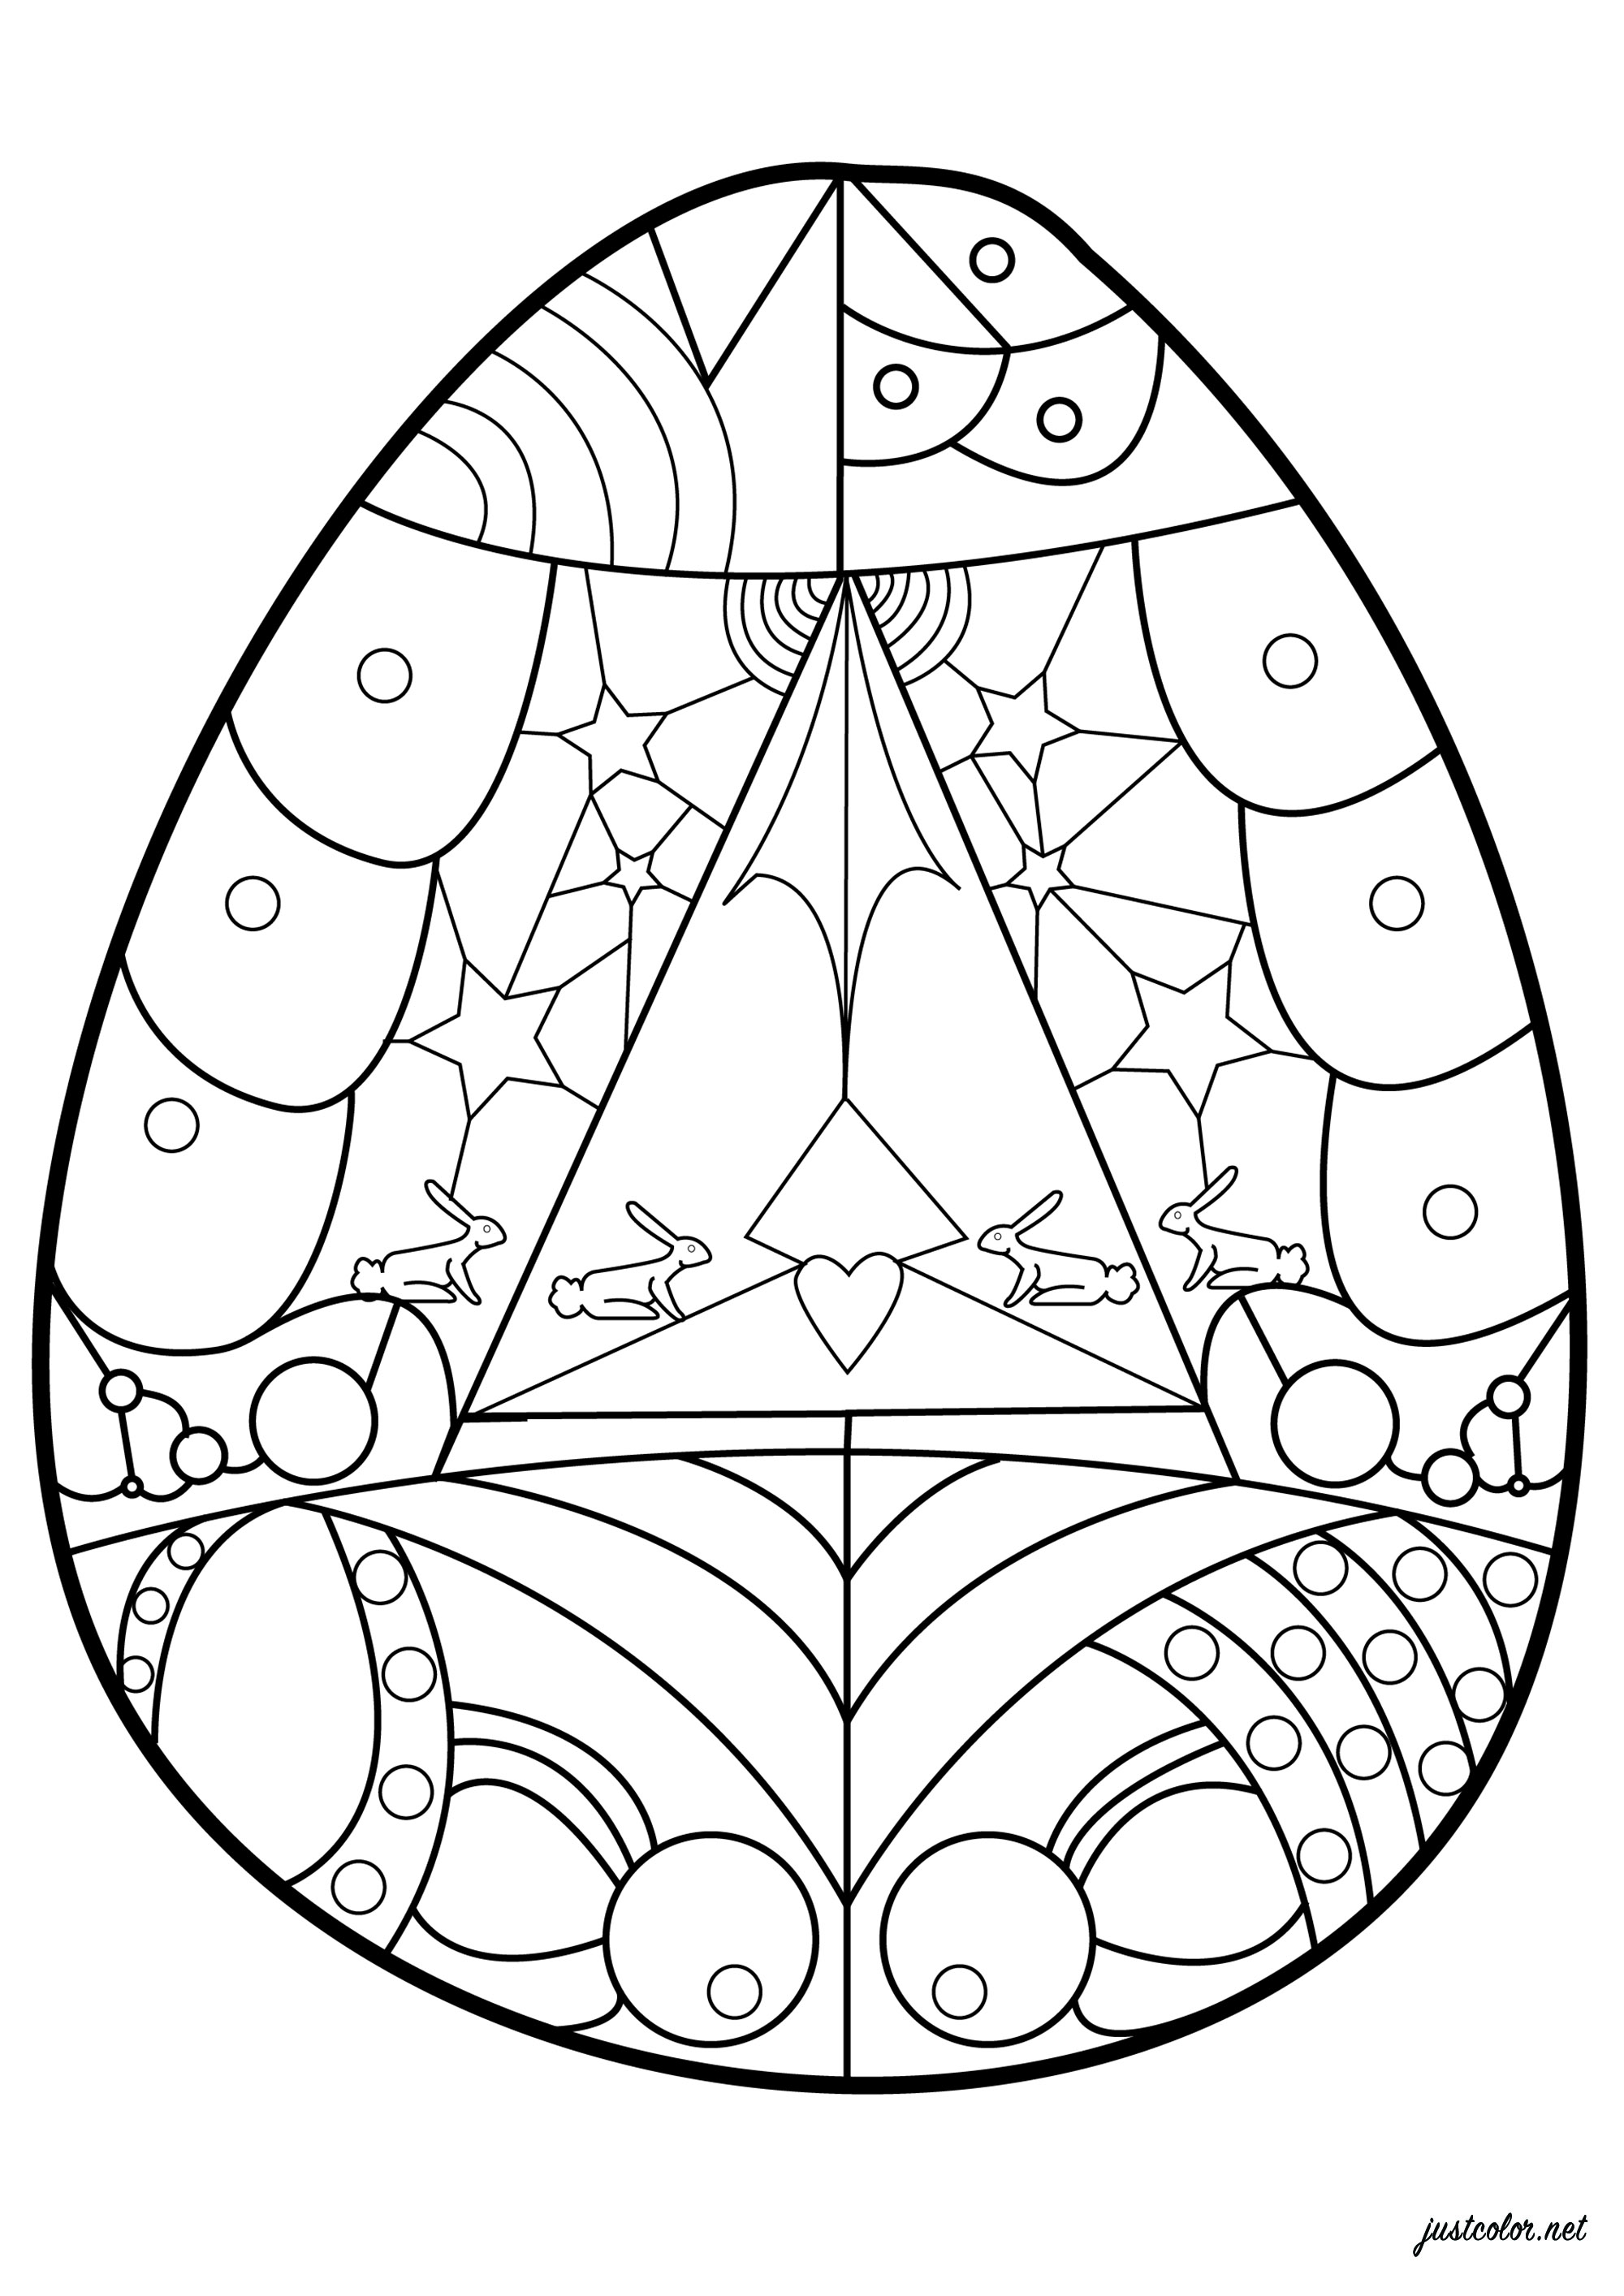 easter egg designs coloring pages